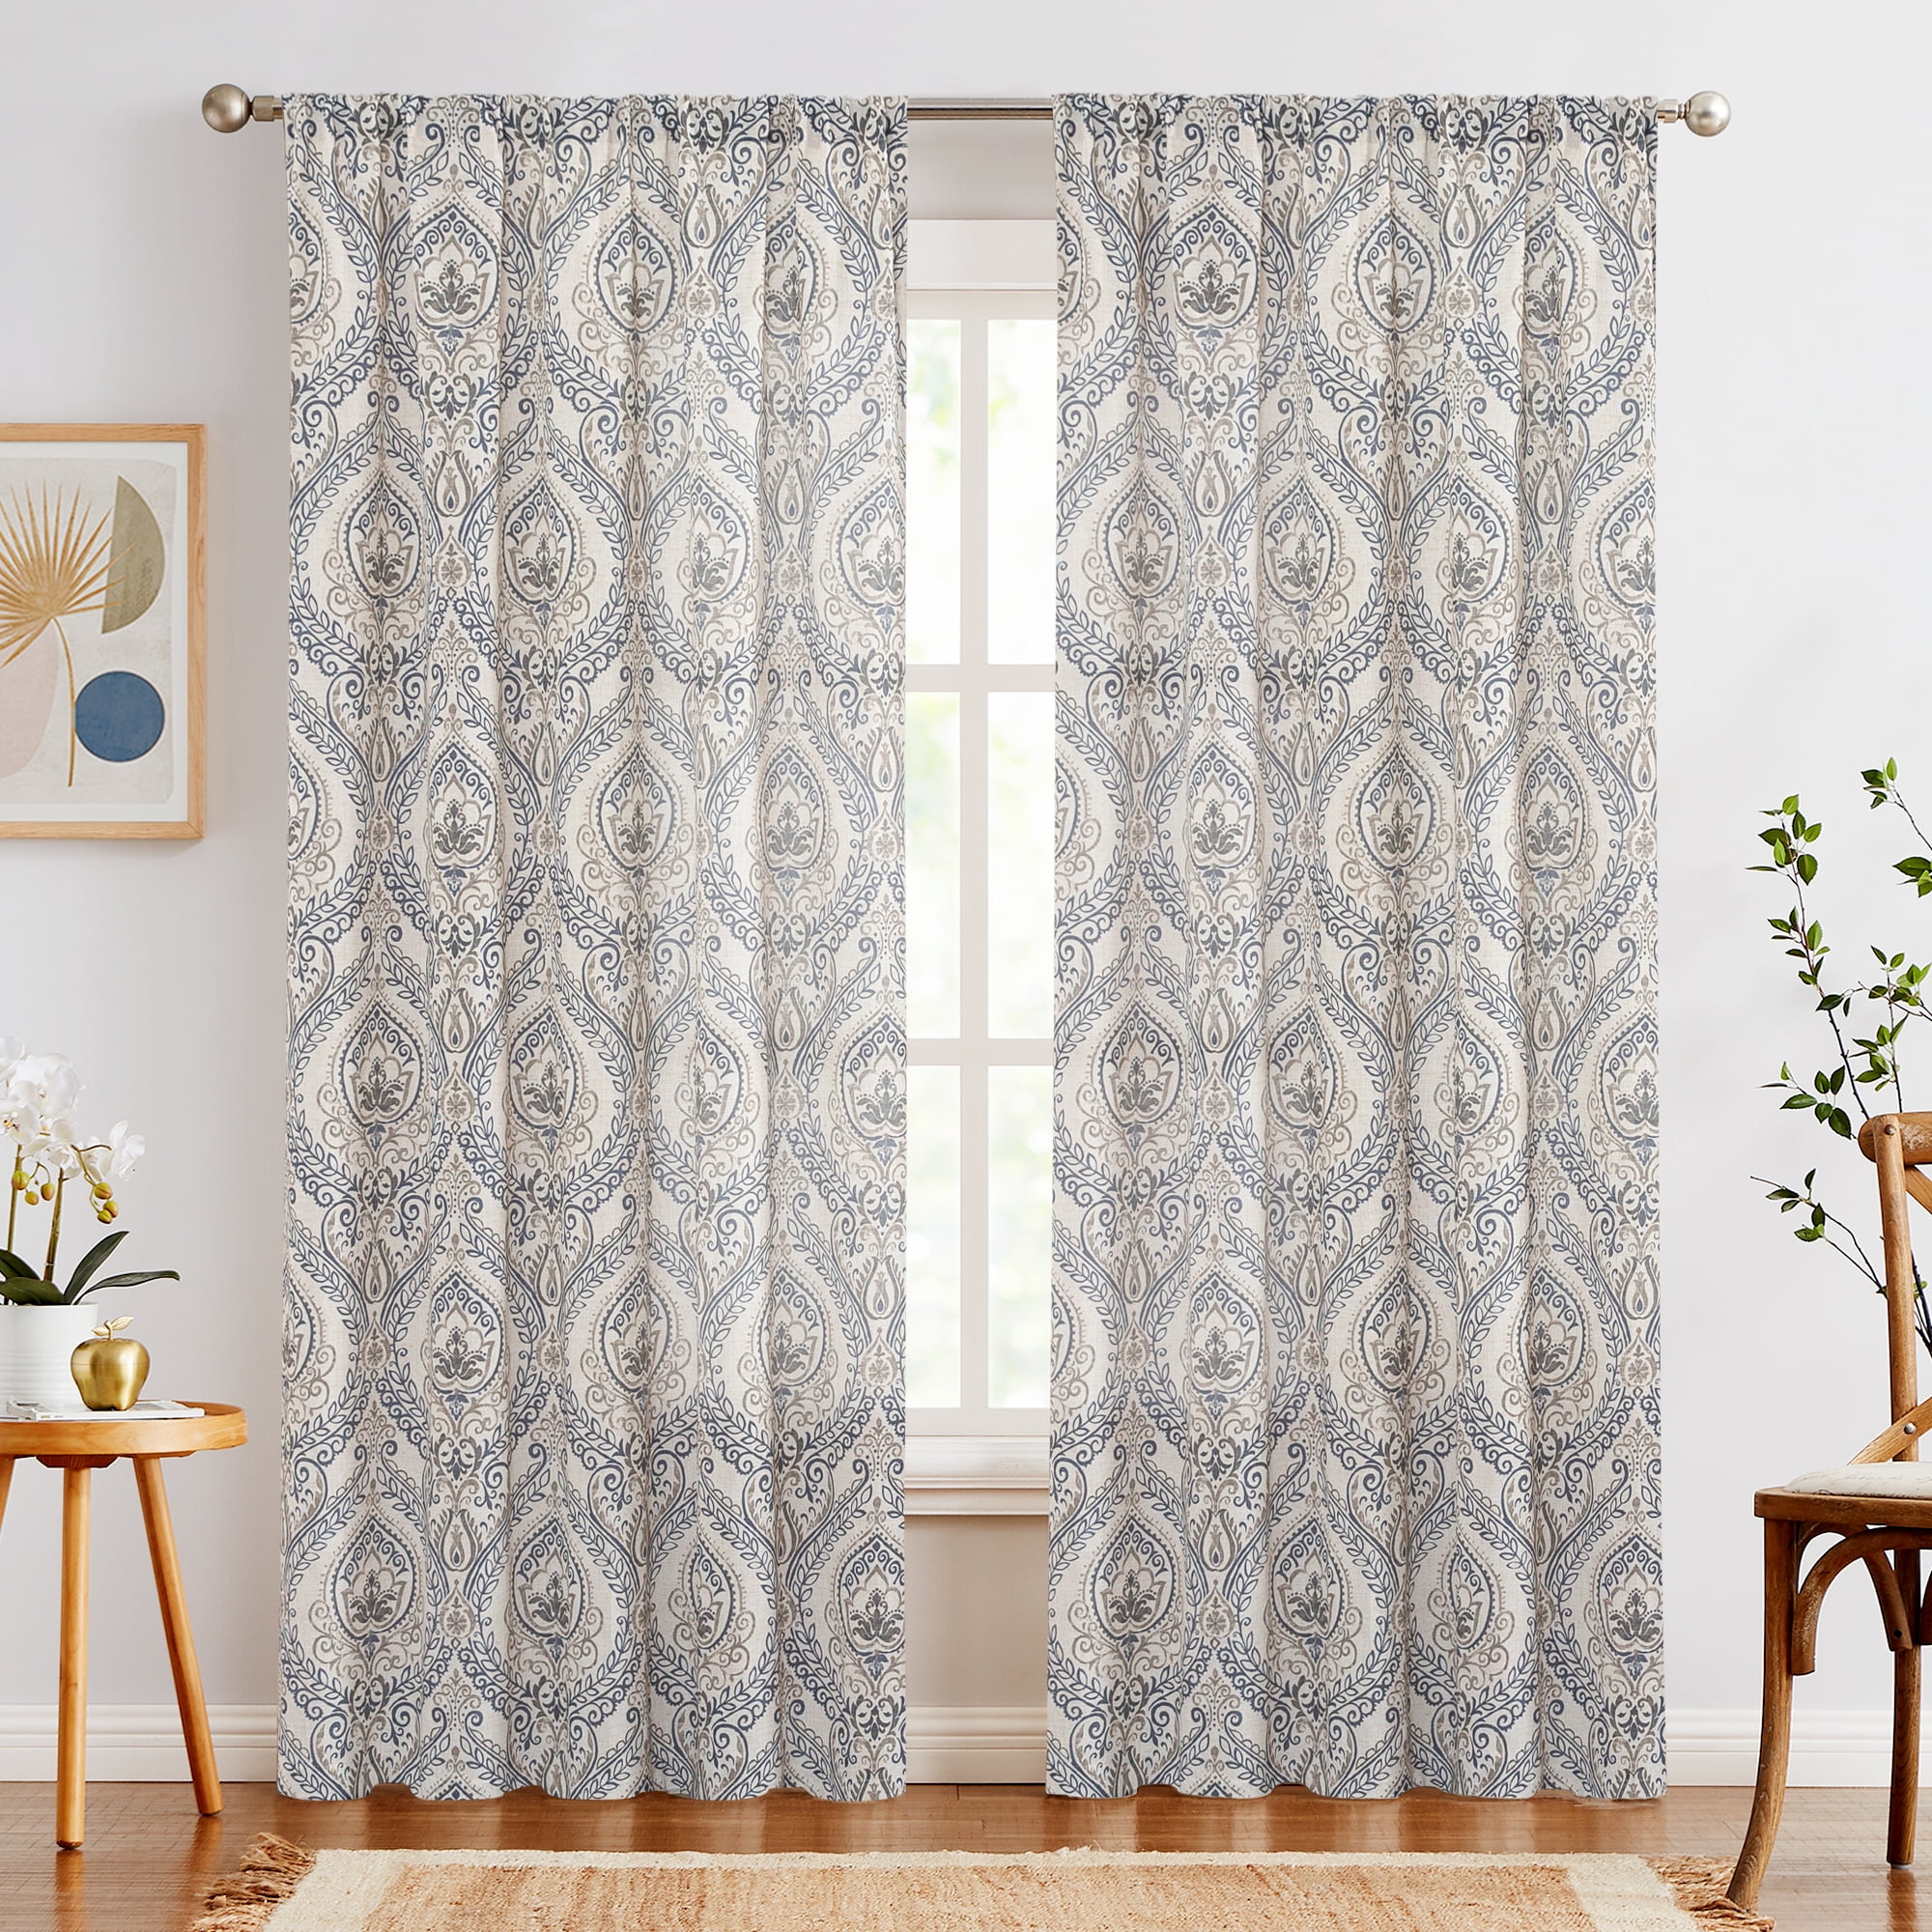 Curtainking Linen Curtains for Living Room 84 inch Medallion Damask ...